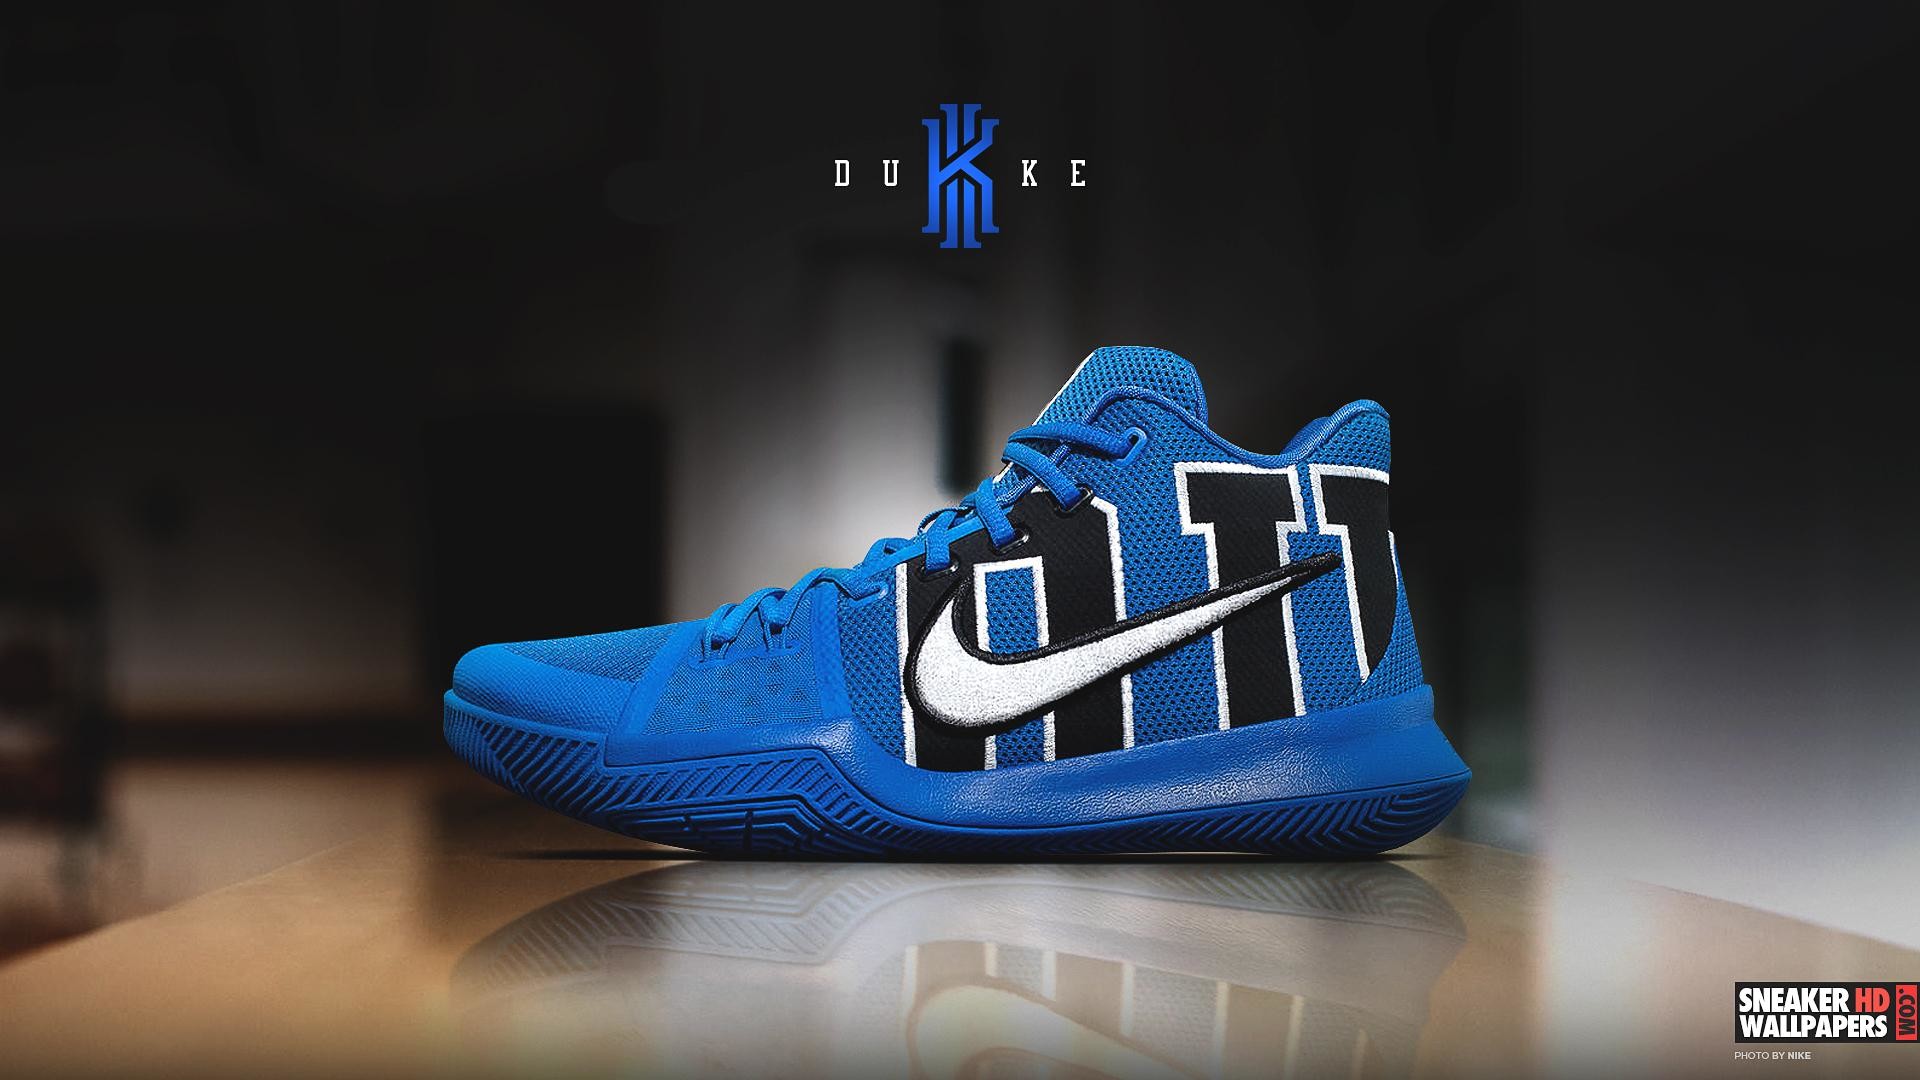 1920x1080 kyrie irving shoes wallpaper #435700